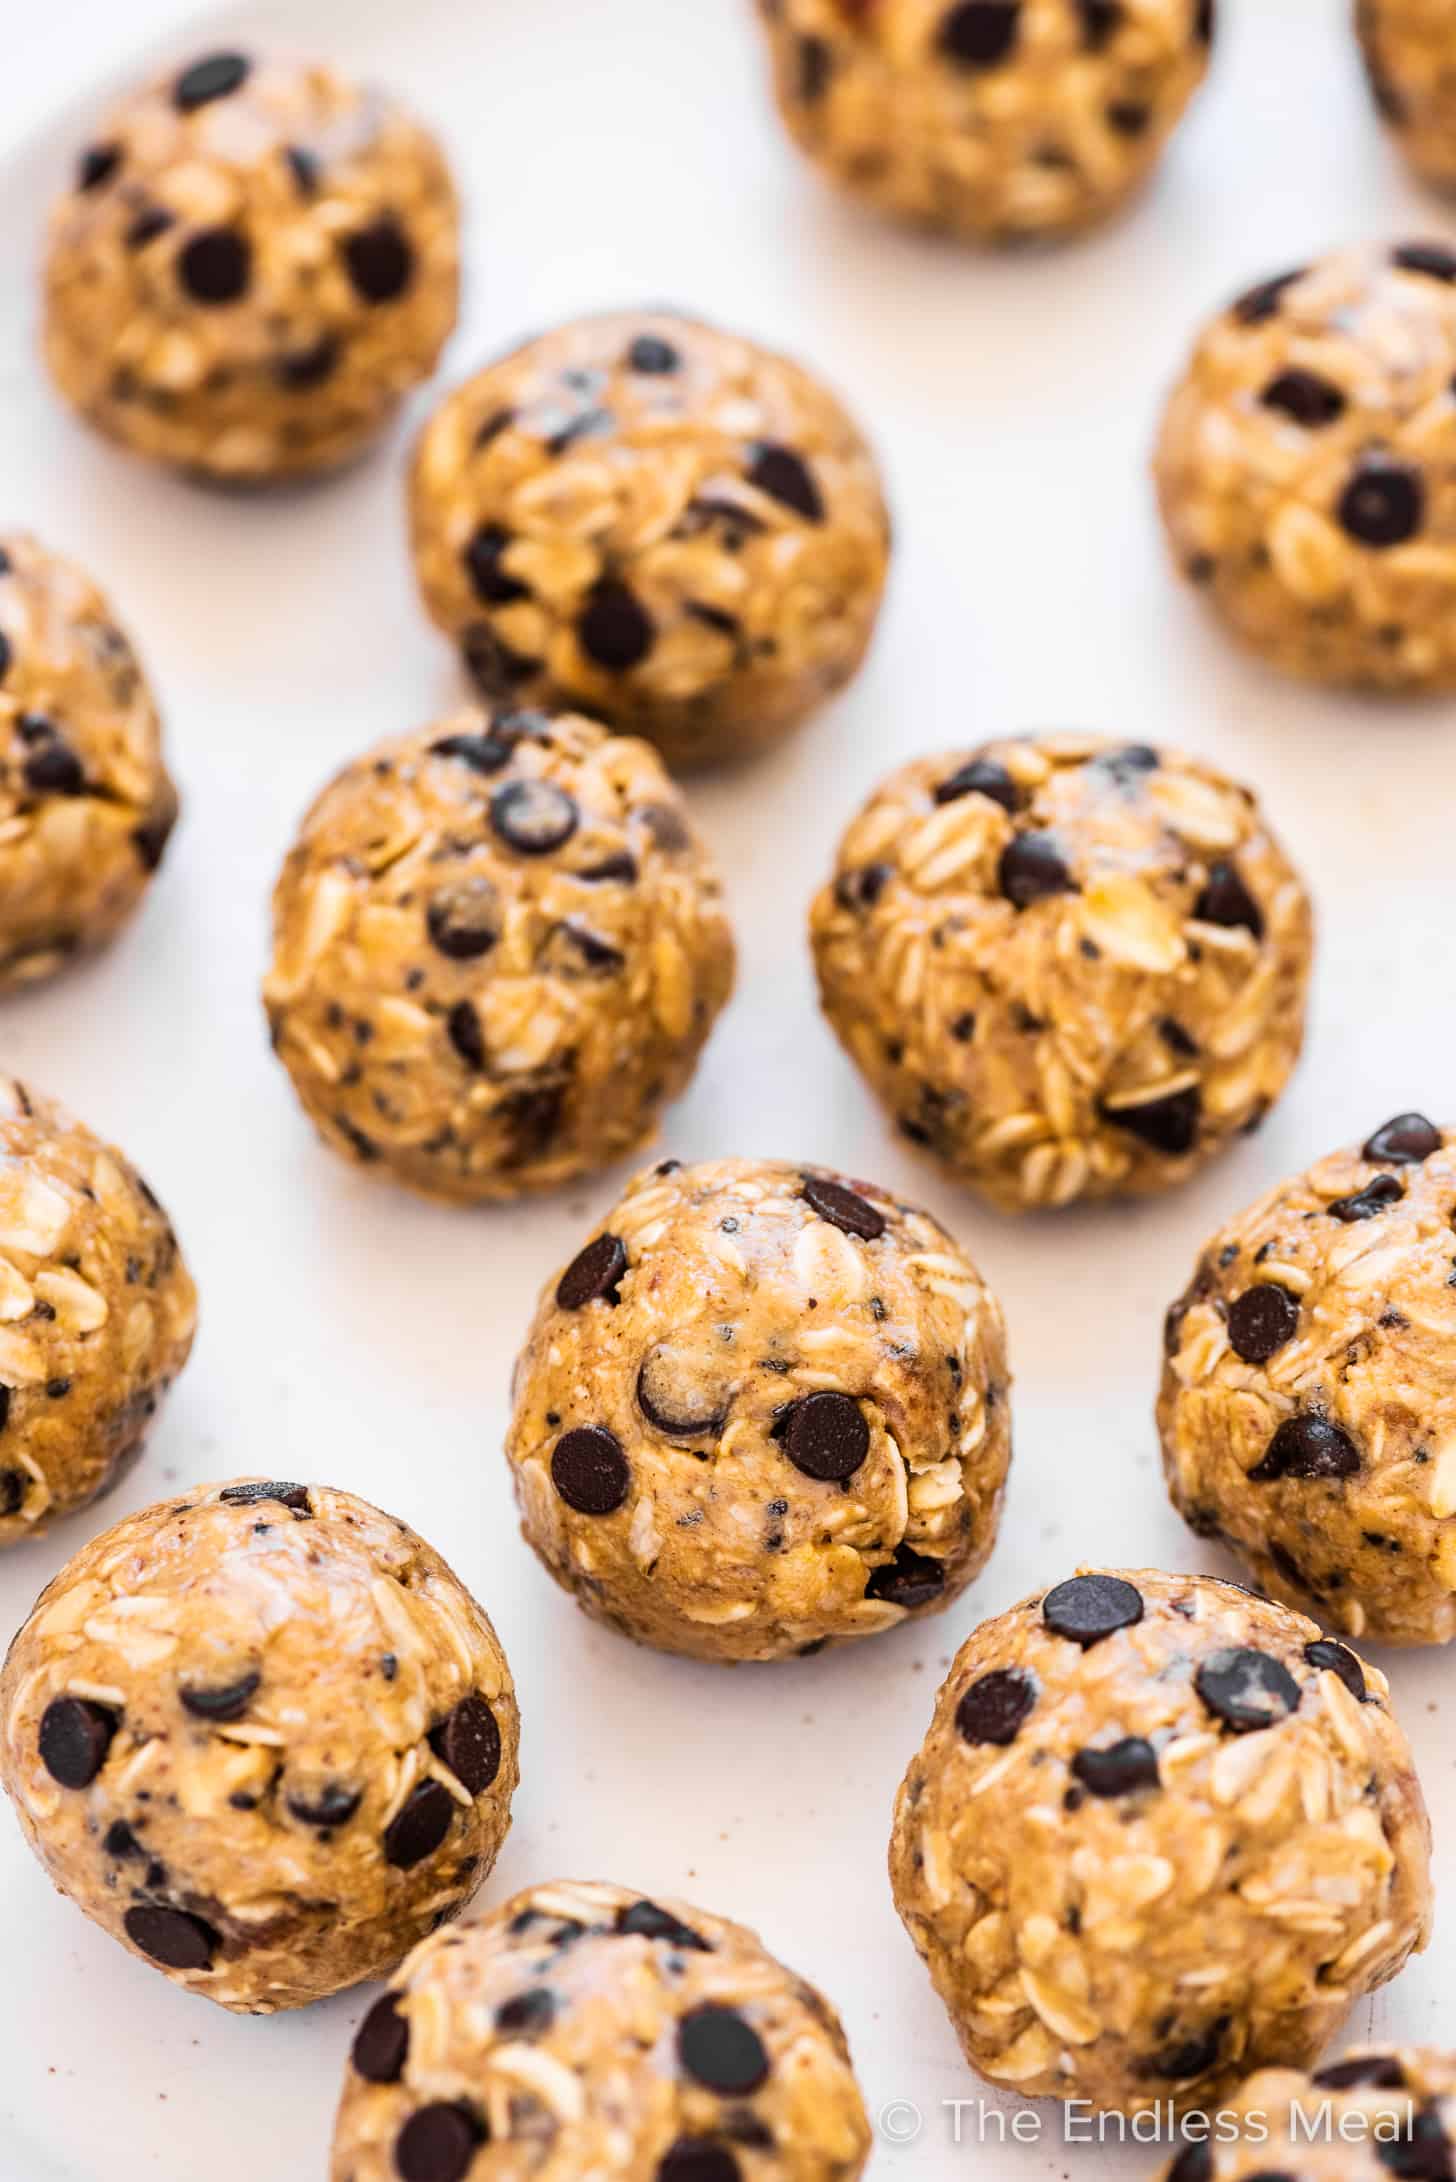 lots of peanut butter energy balls with chocolate chips